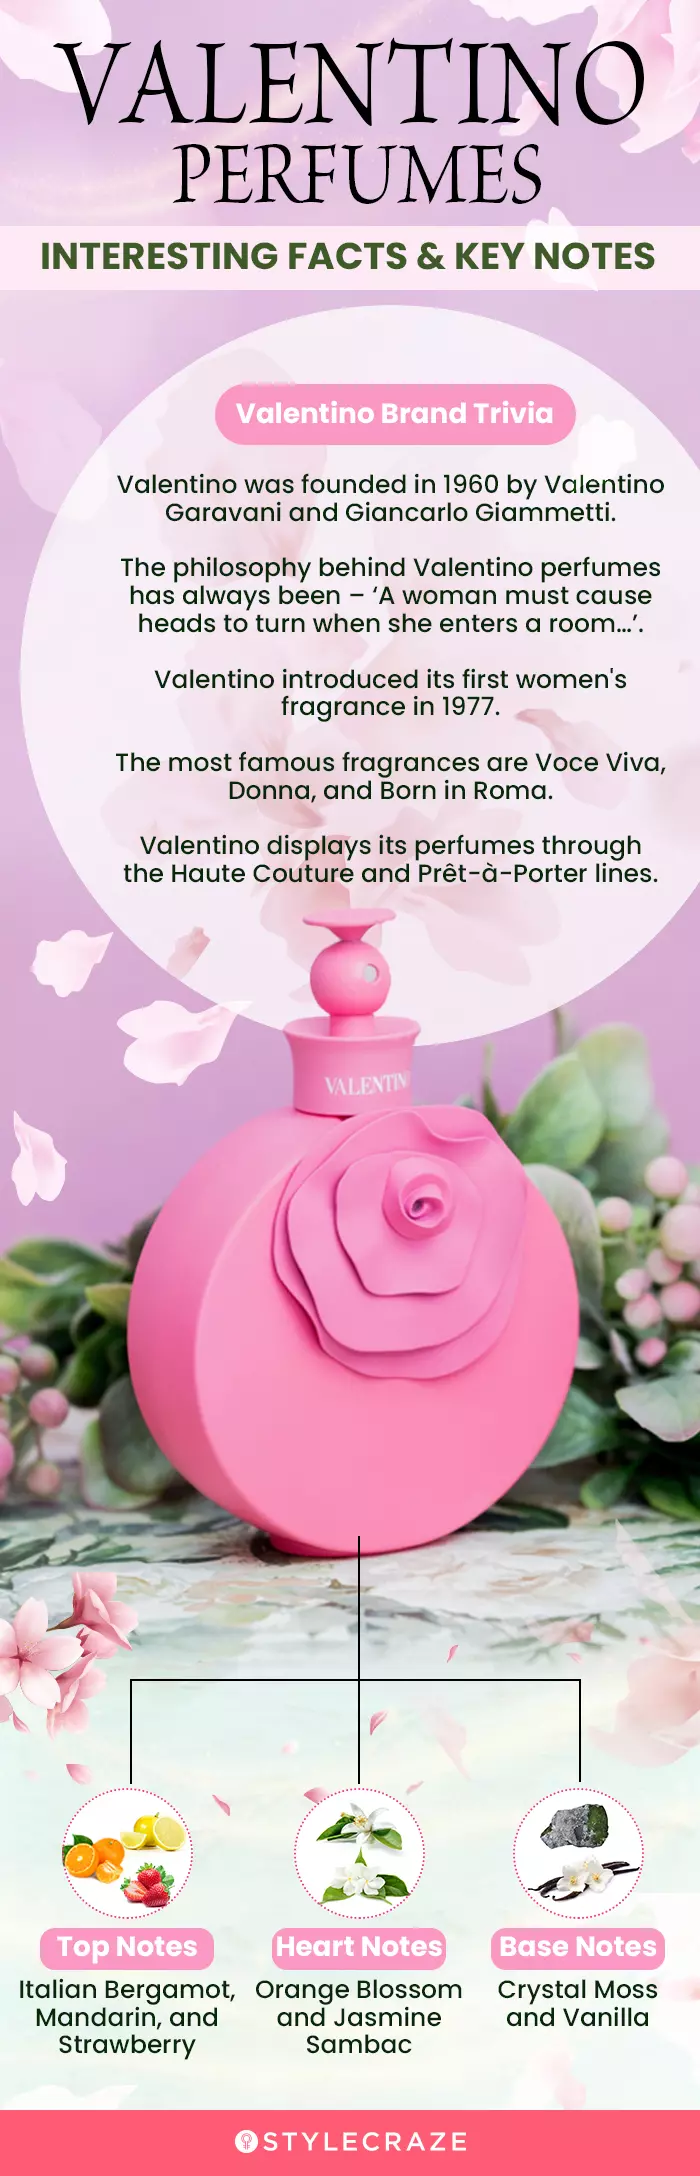 Valentino Perfumes: Interesting Facts & Key Notes (infographic)